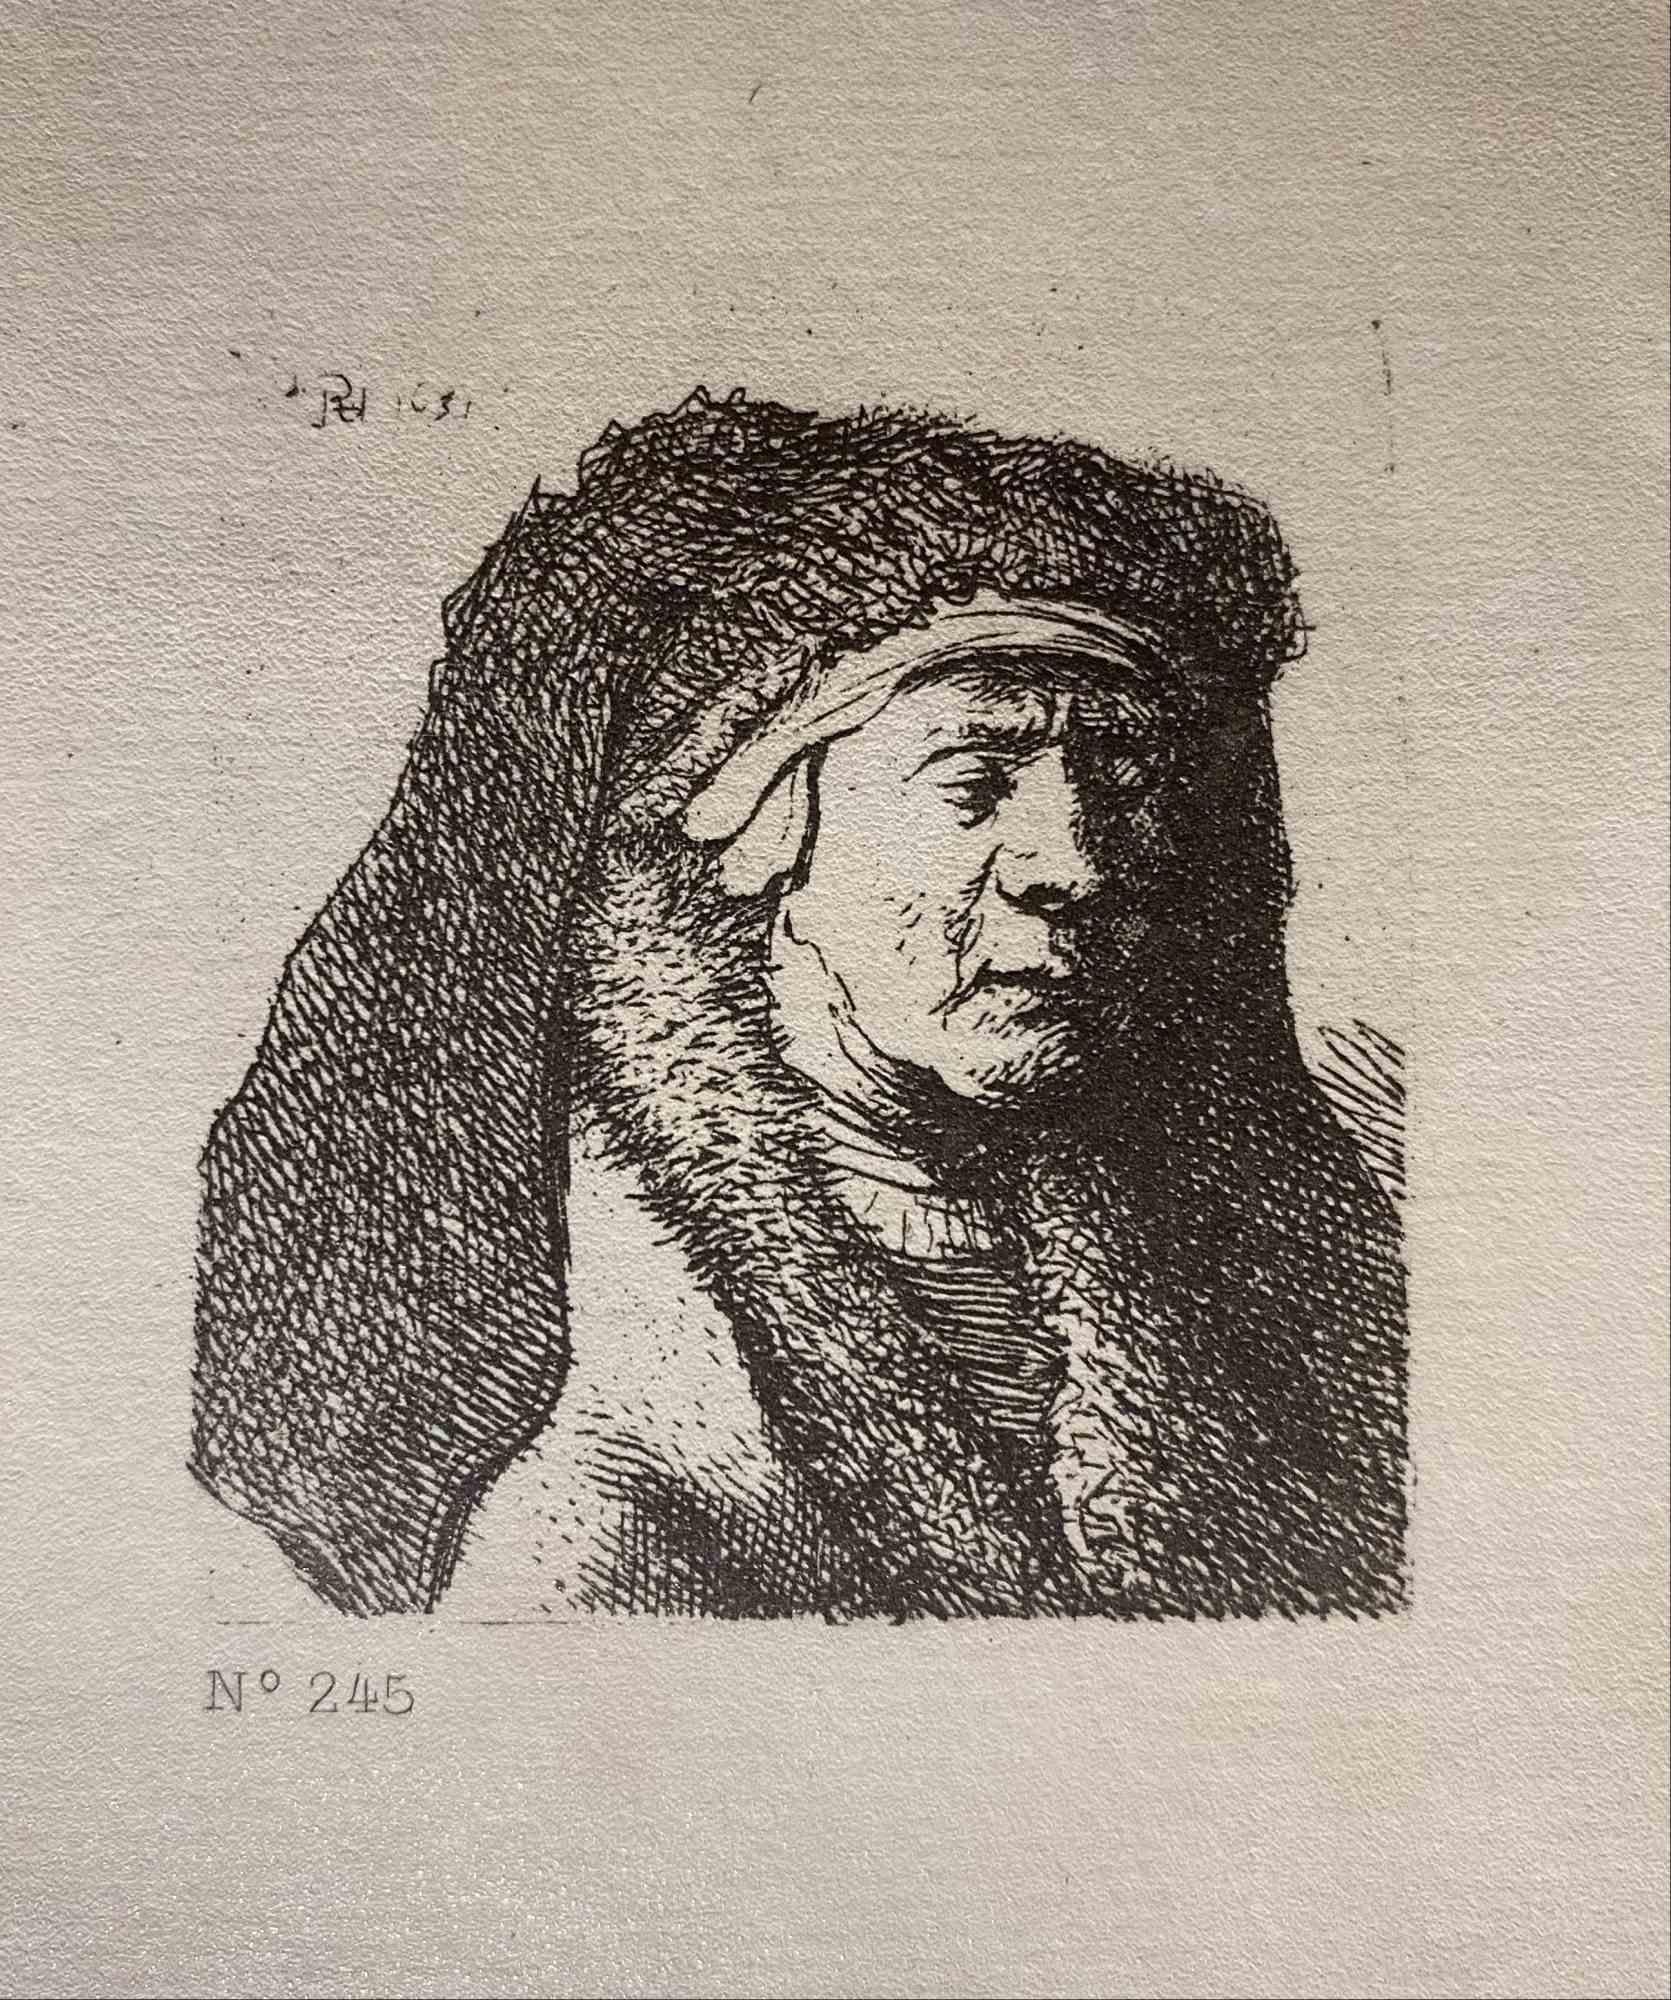 Charles Amand Durand Portrait Print - The Artist's Mother - Engraving after Rembrandt - 19th Century